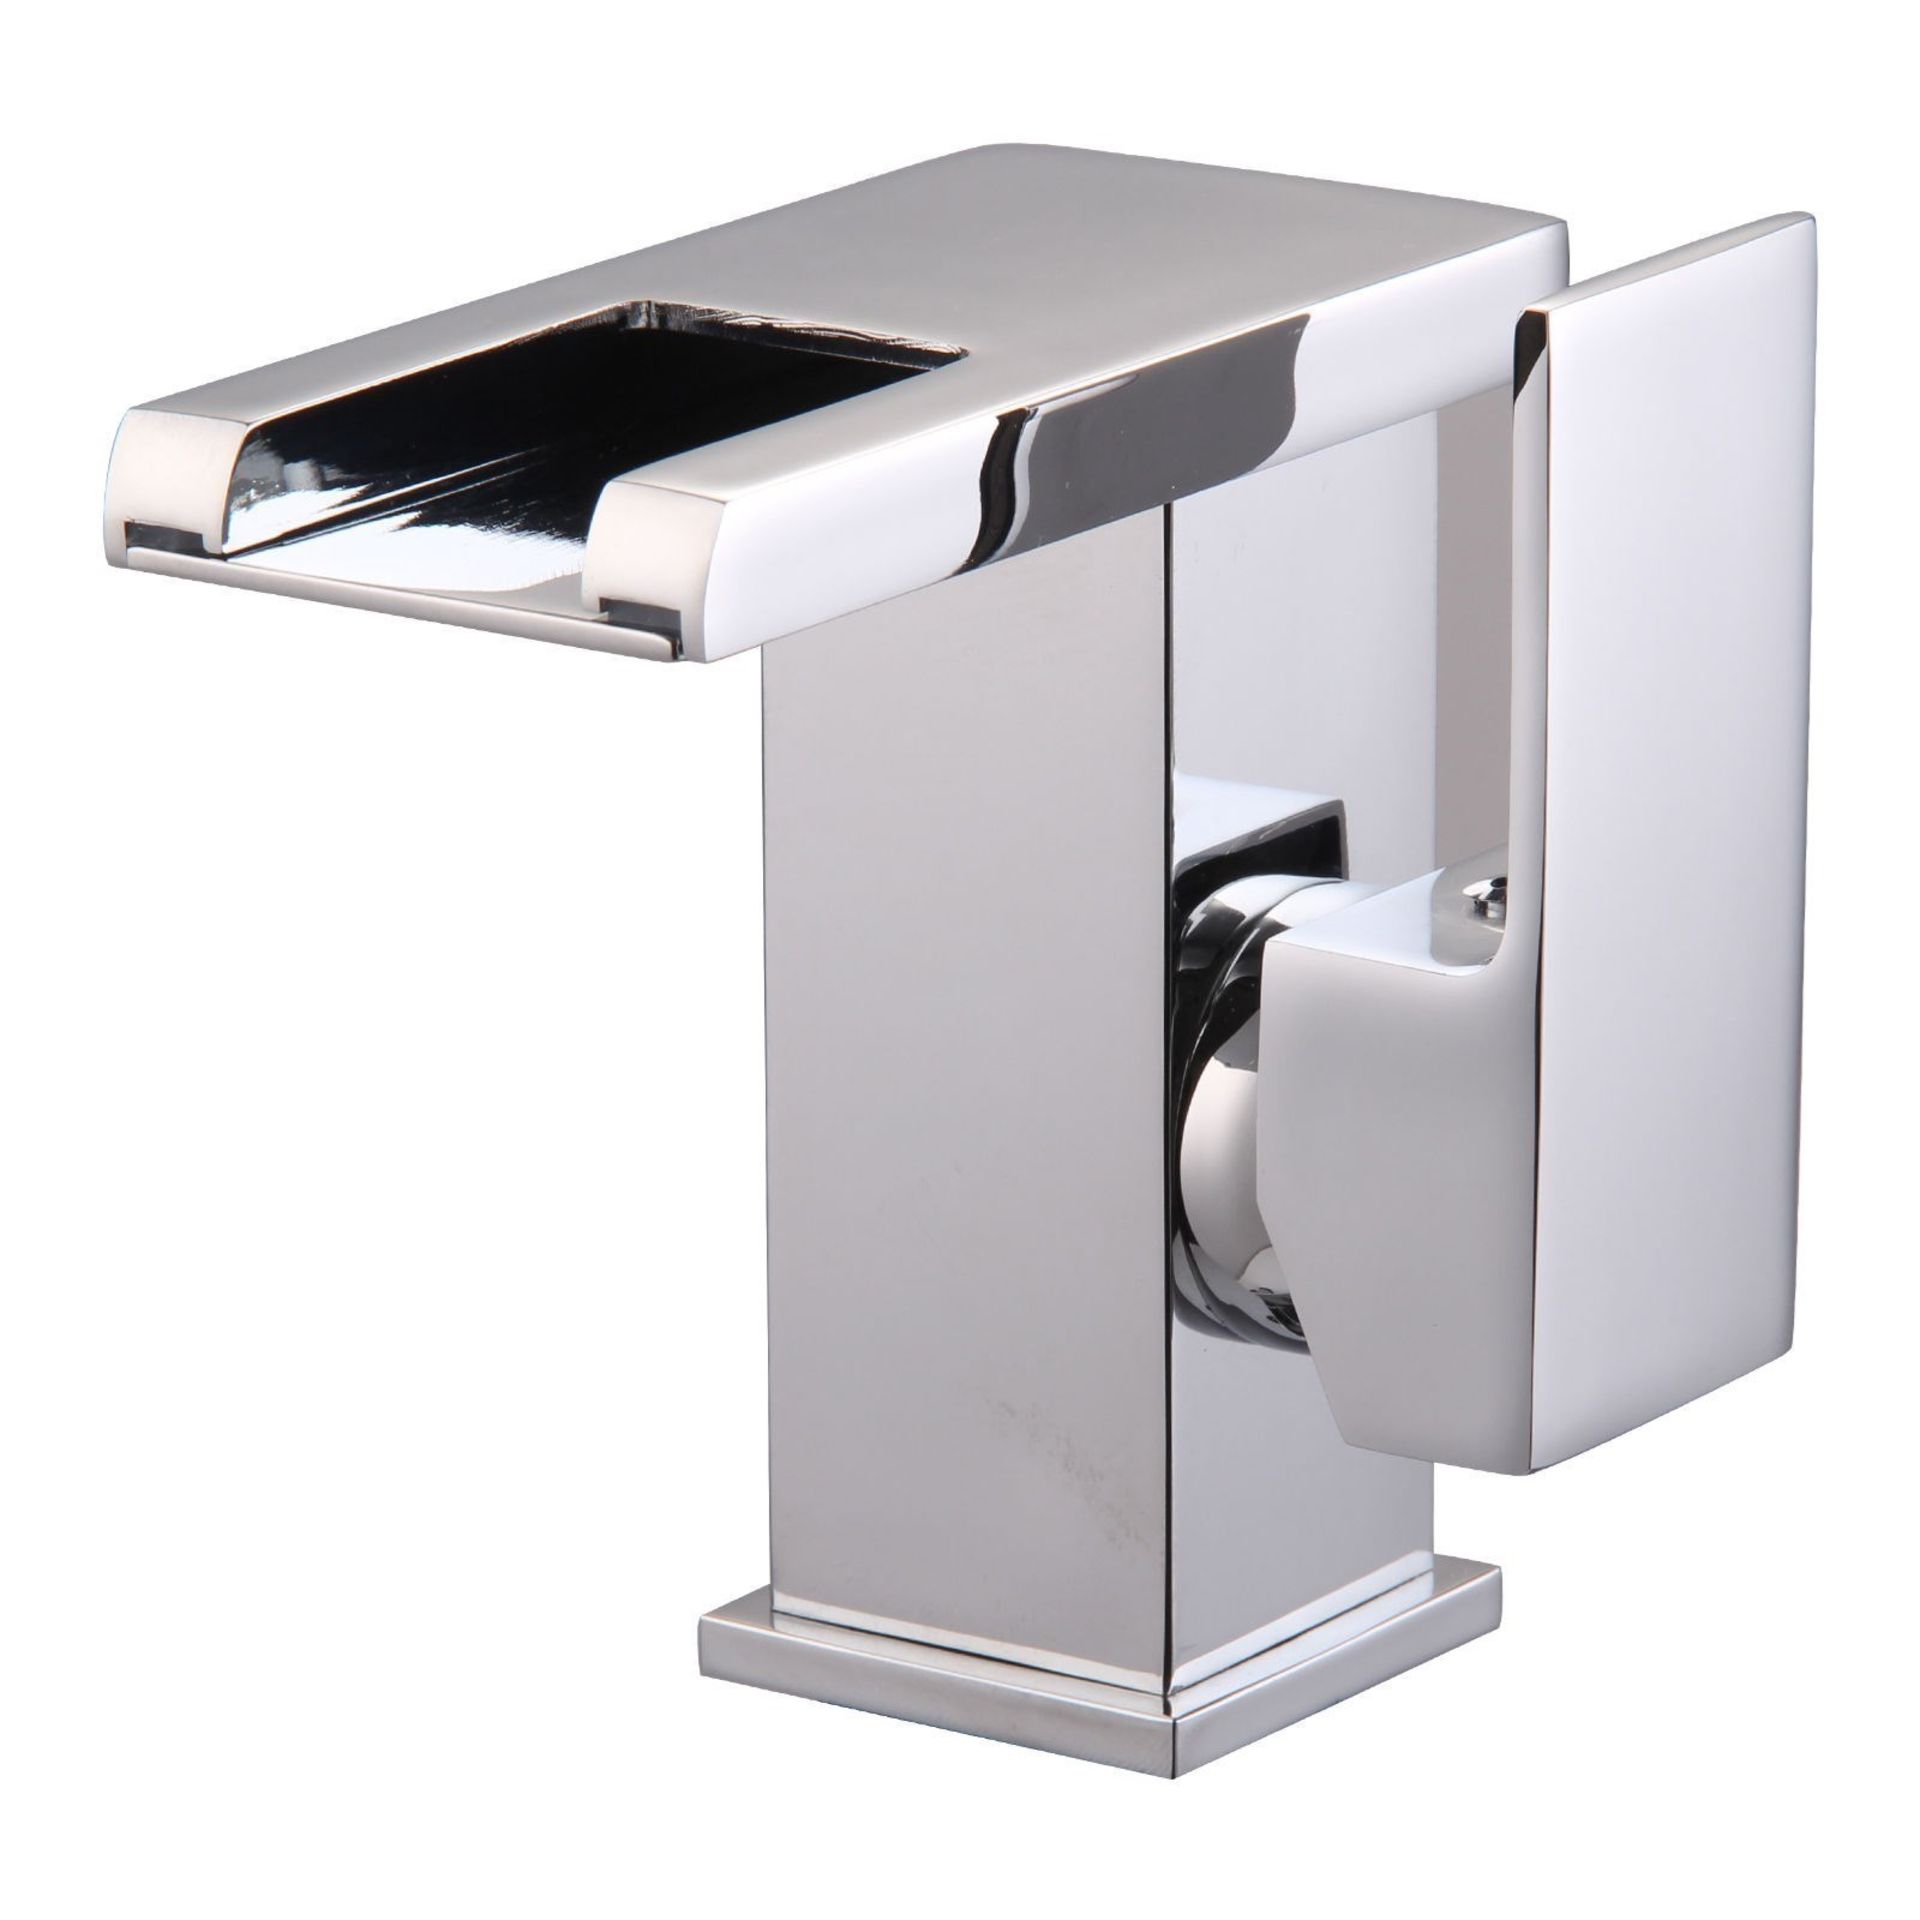 LED Waterfall Bathroom Basin Mixer Tap. RRP £229.99.Easy to install and clean. All copper m... - Image 2 of 2